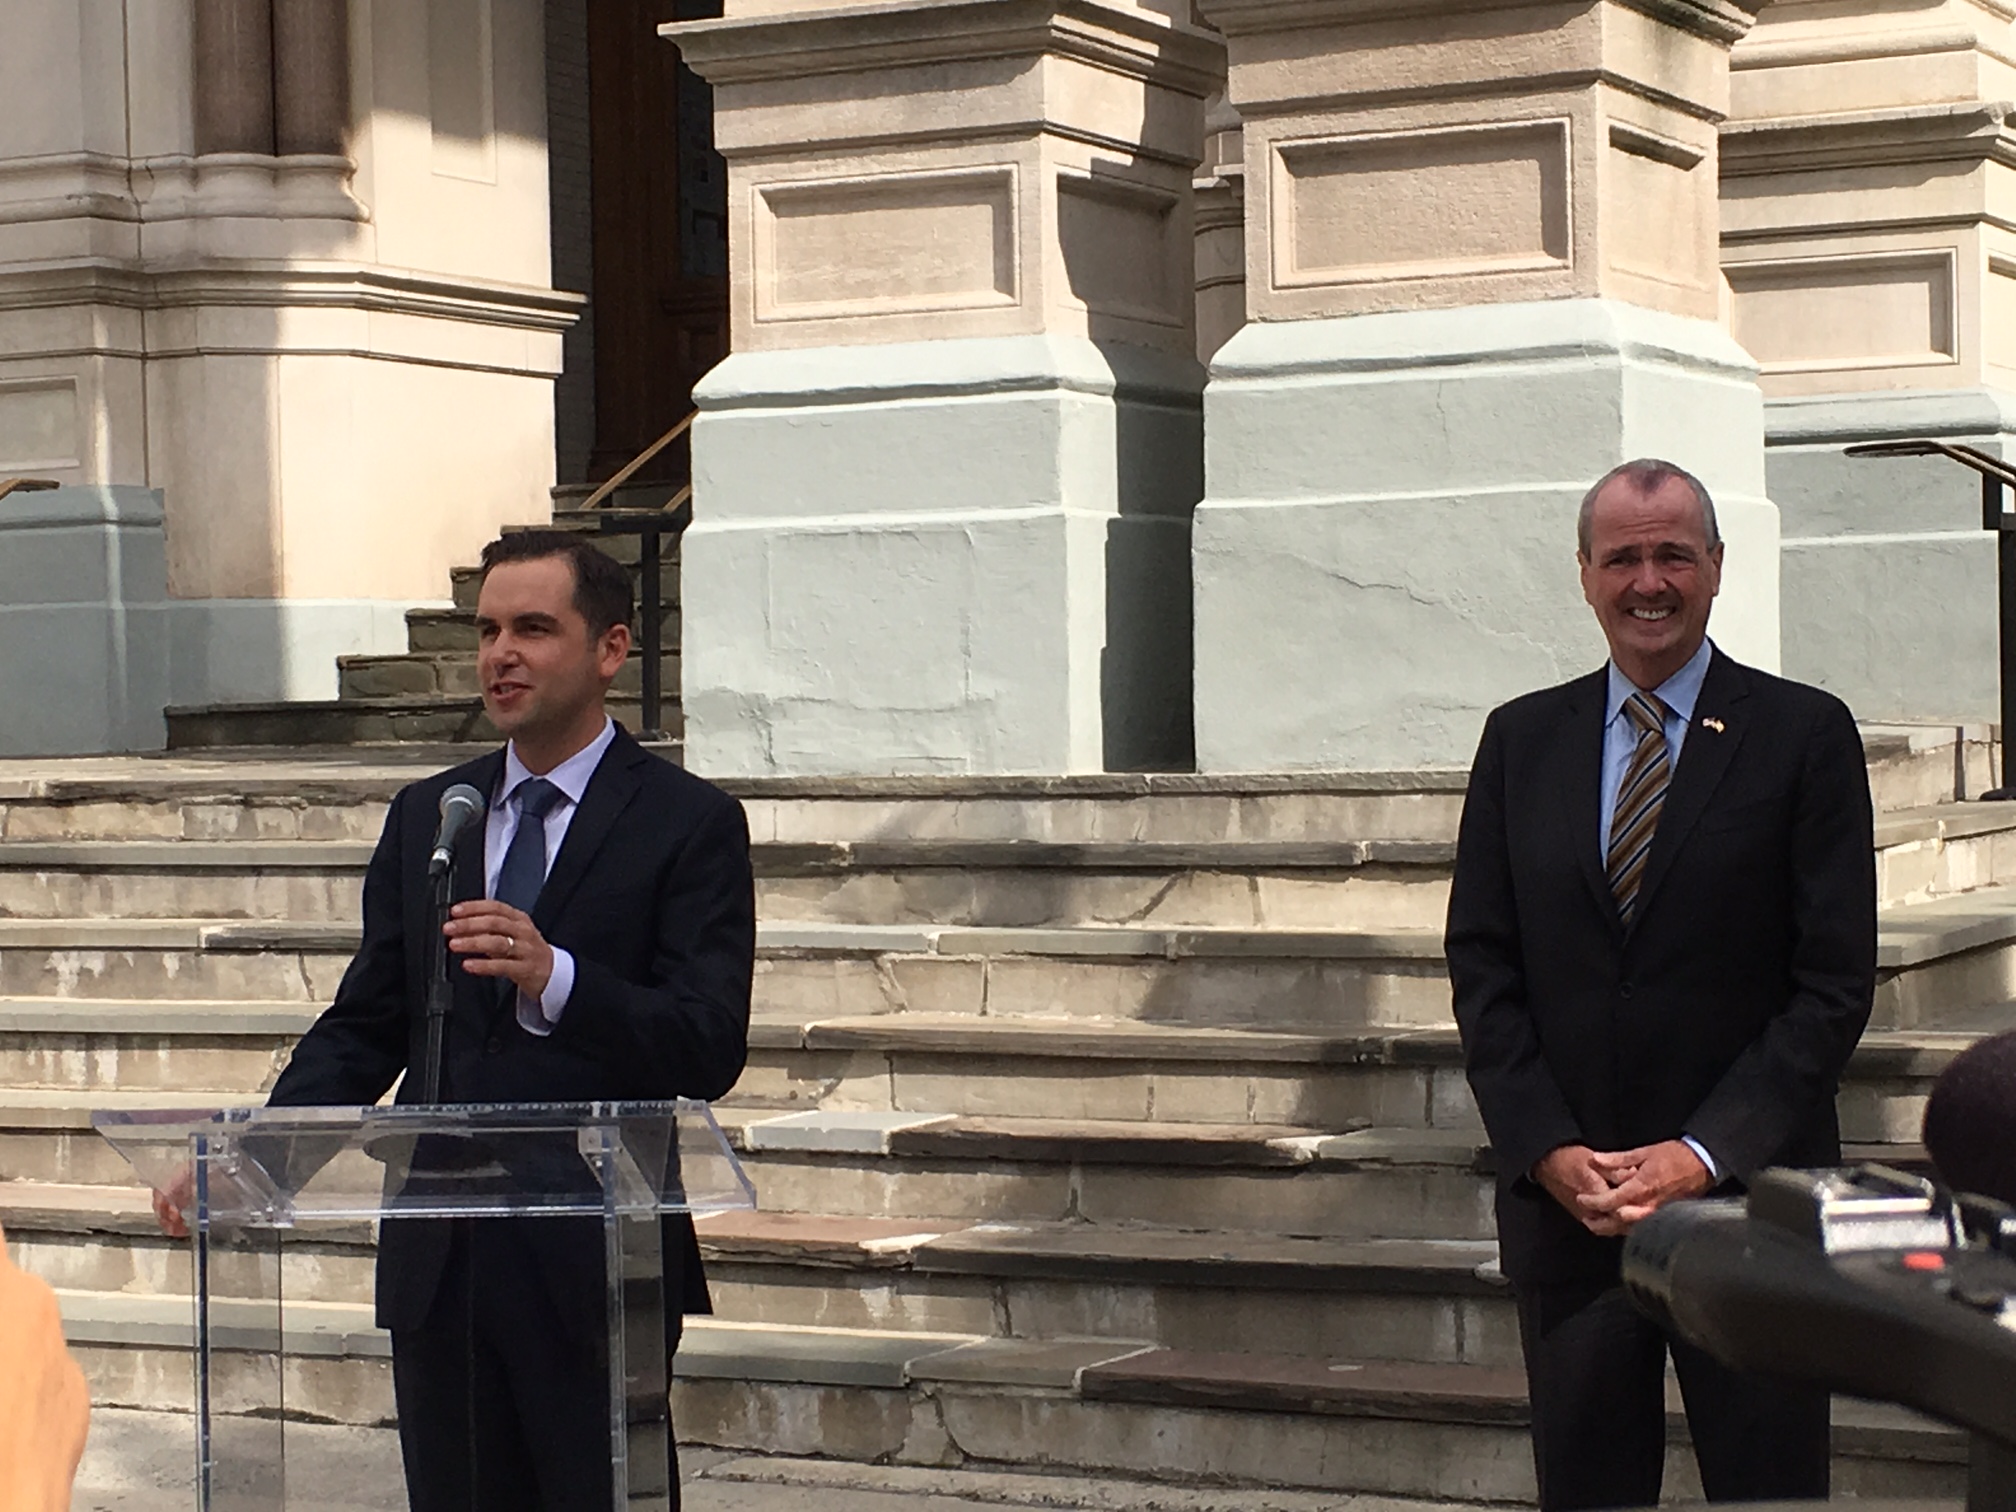 Fulop announced that he would be supporting former Ambassador Phil Murphy for governor.